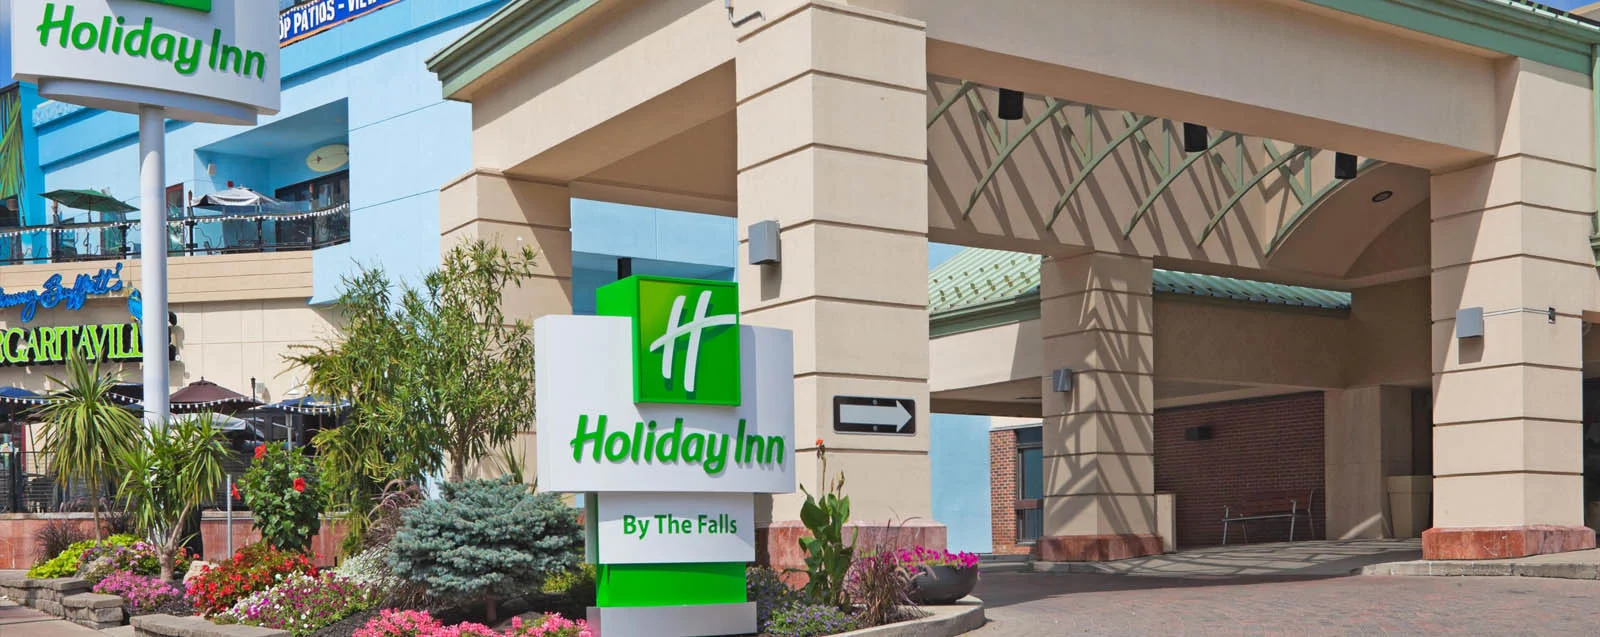 Holiday Inn By The Falls